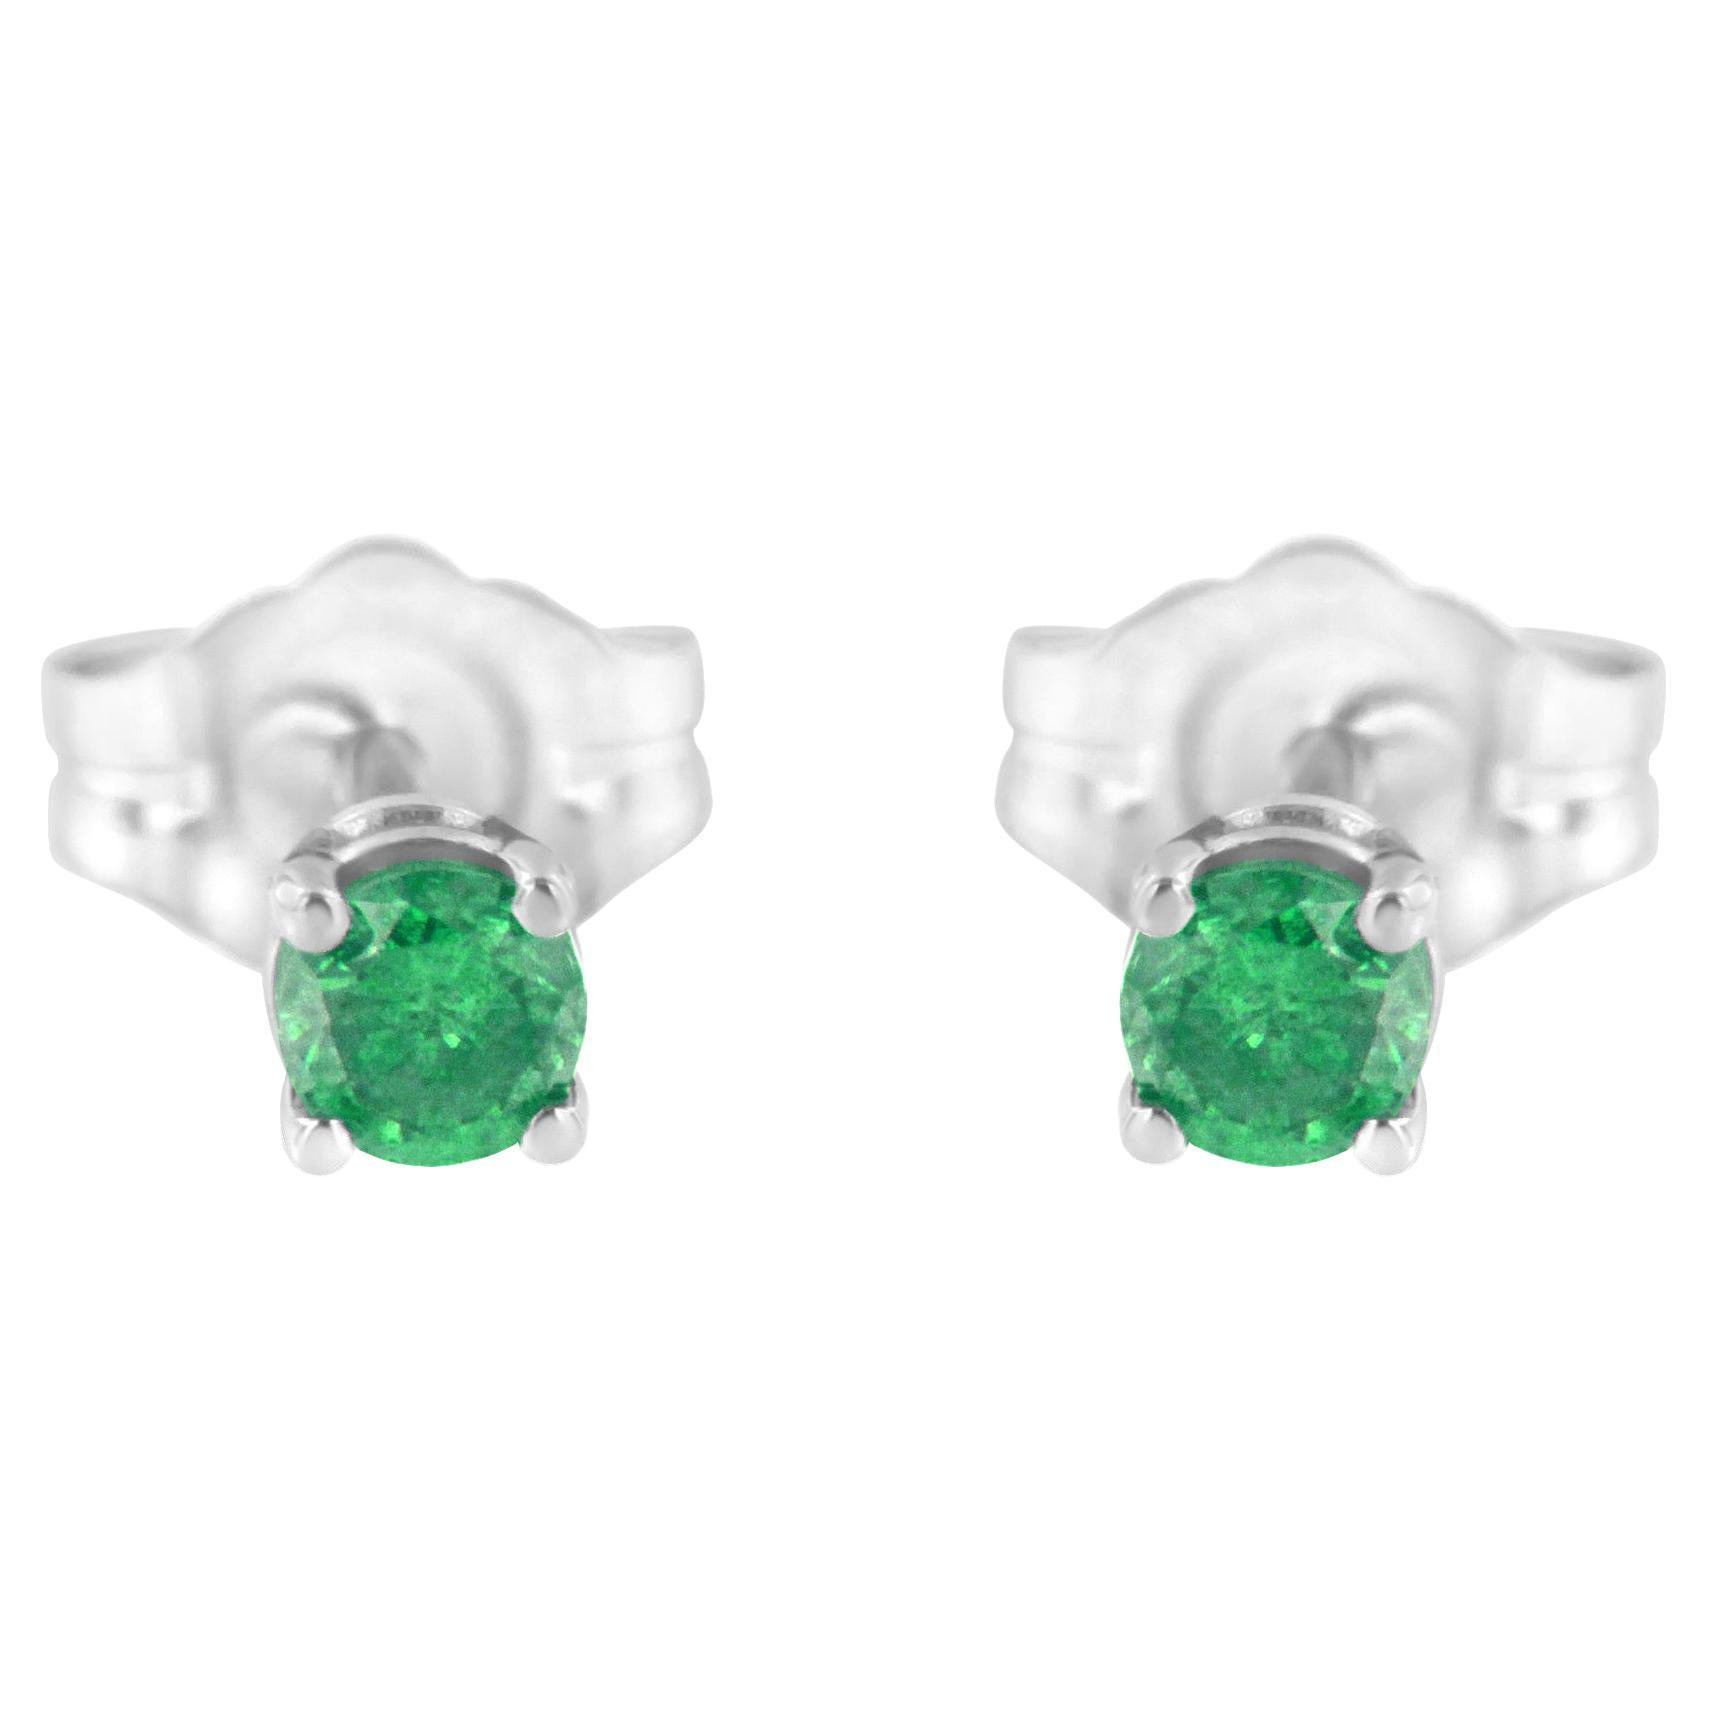 .925 Sterling Silver 1/4 Carat Treated Green Diamond Solitaire Stud Earrings For Sale